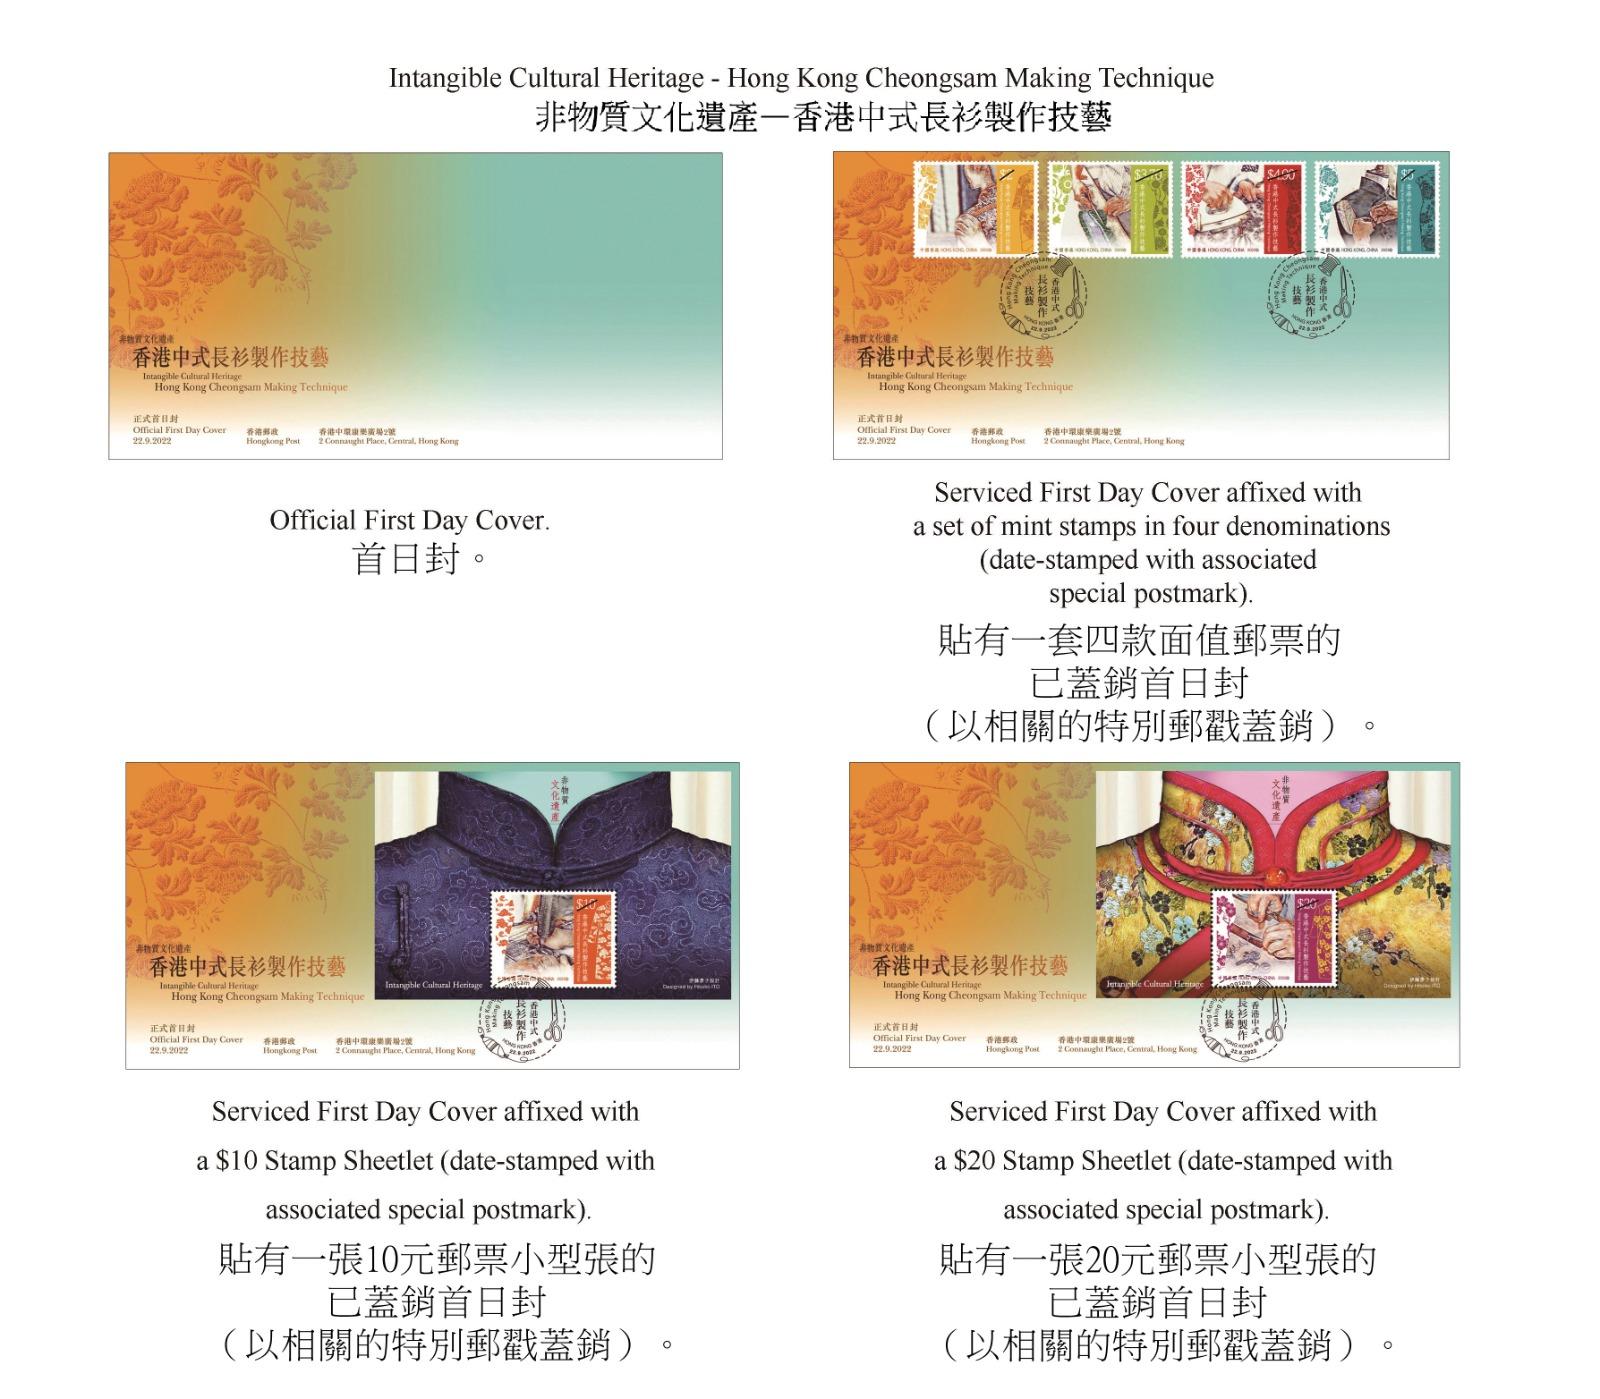 Hongkong Post will launch a special stamp issue and associated philatelic products on the theme of "Intangible Cultural Heritage – Hong Kong Cheongsam Making Technique" on September 22 (Thursday). Photo shows the first day covers.